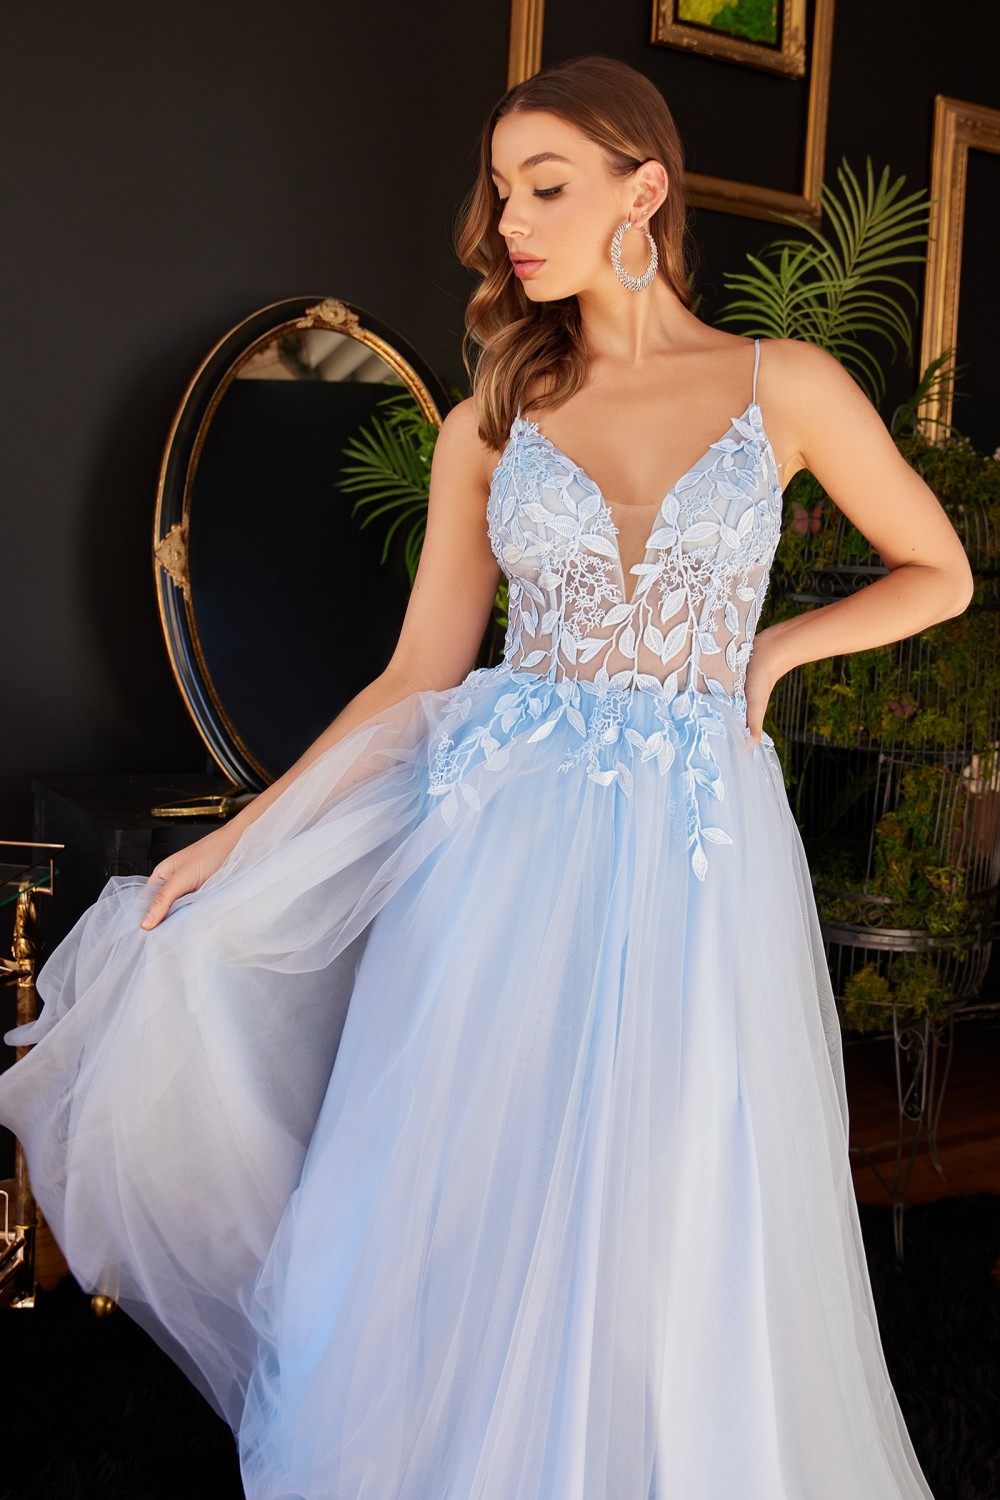 Floral lace plunging neckline gown